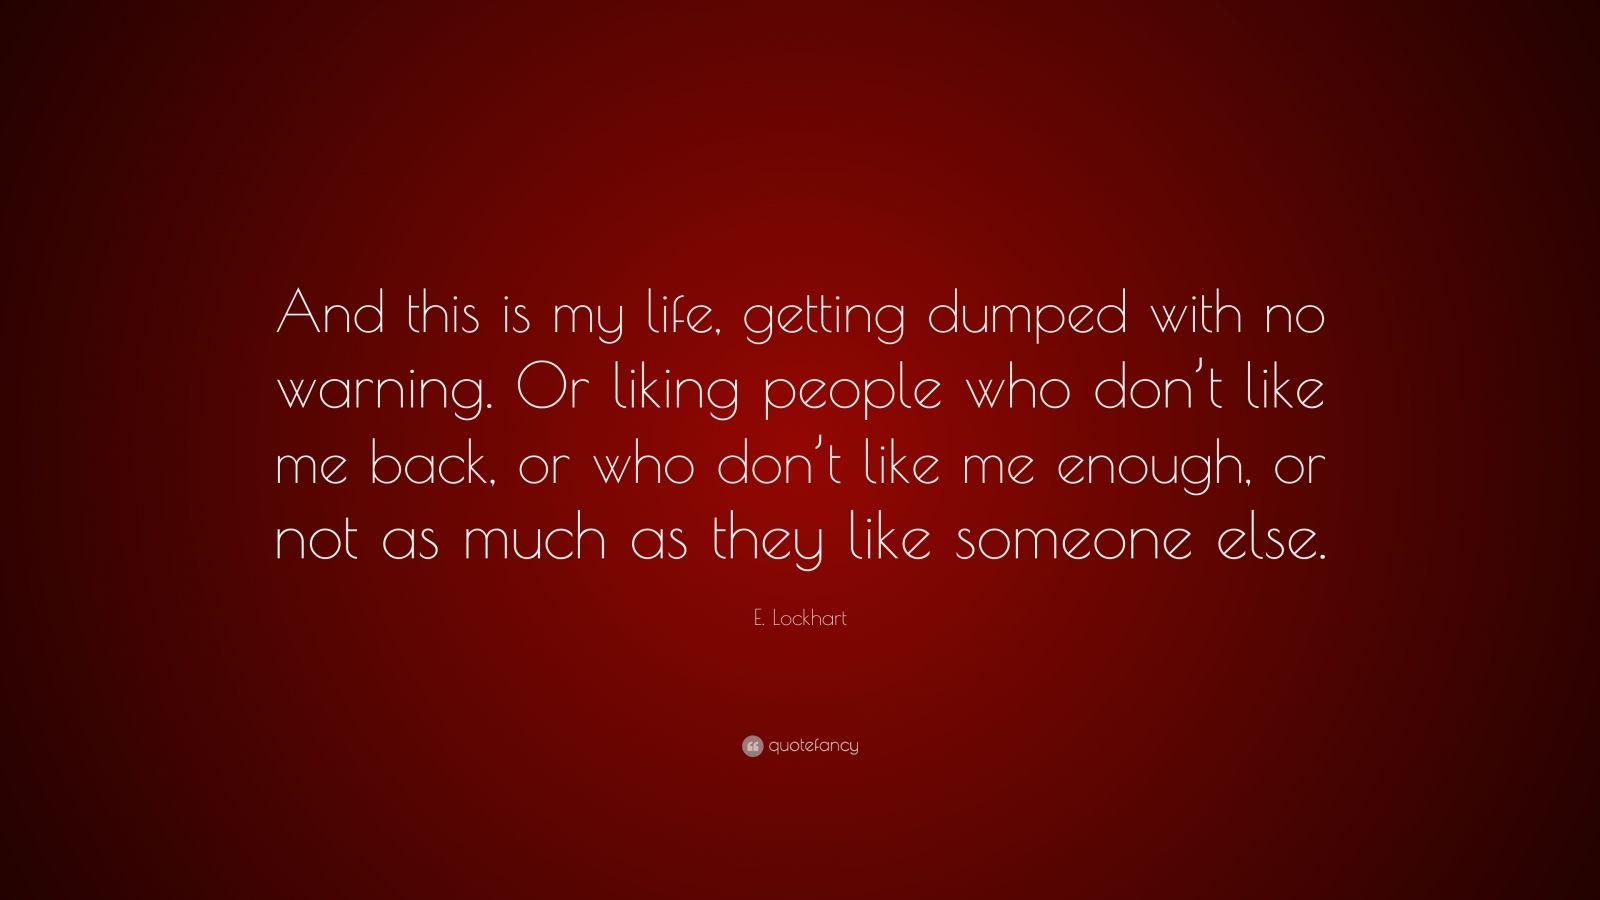 E Lockhart Quote “and This Is My Life Getting Dumped With No Warning Or Liking People Who